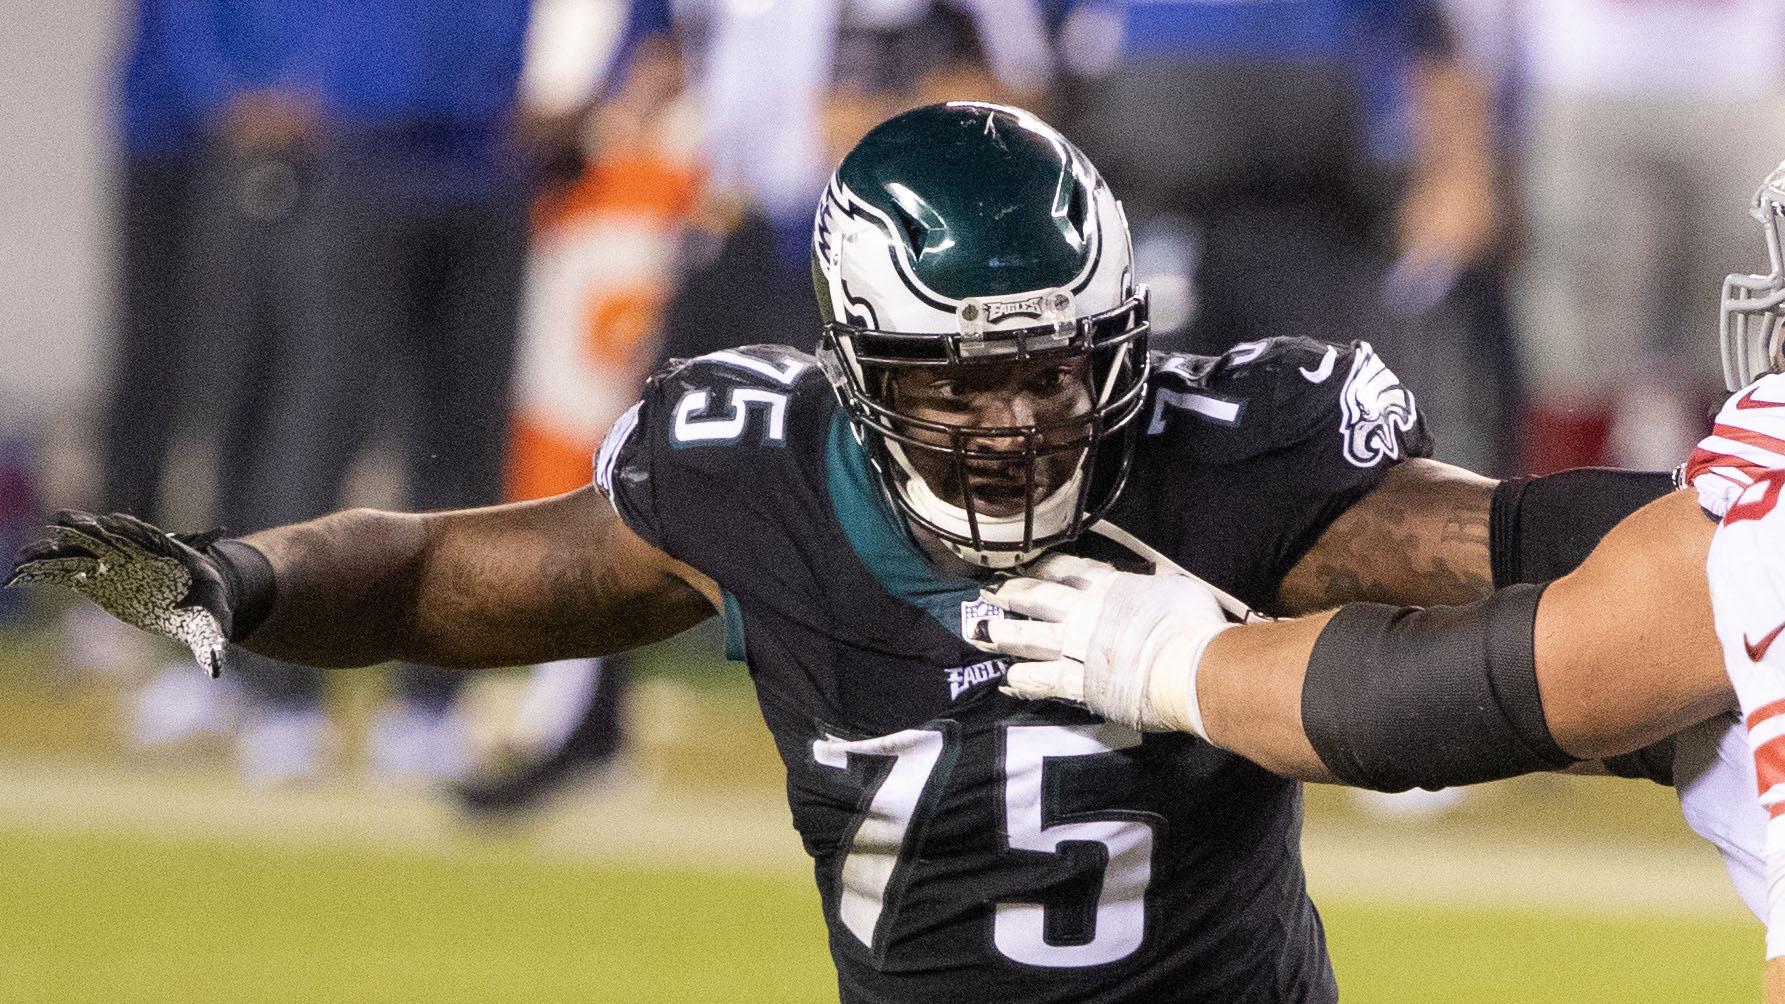 Philadelphia Eagles defensive end Vinny Curry (75) against the New York Giants during the fourth quarter at Lincoln Financial Field. / USA TODAY Sports